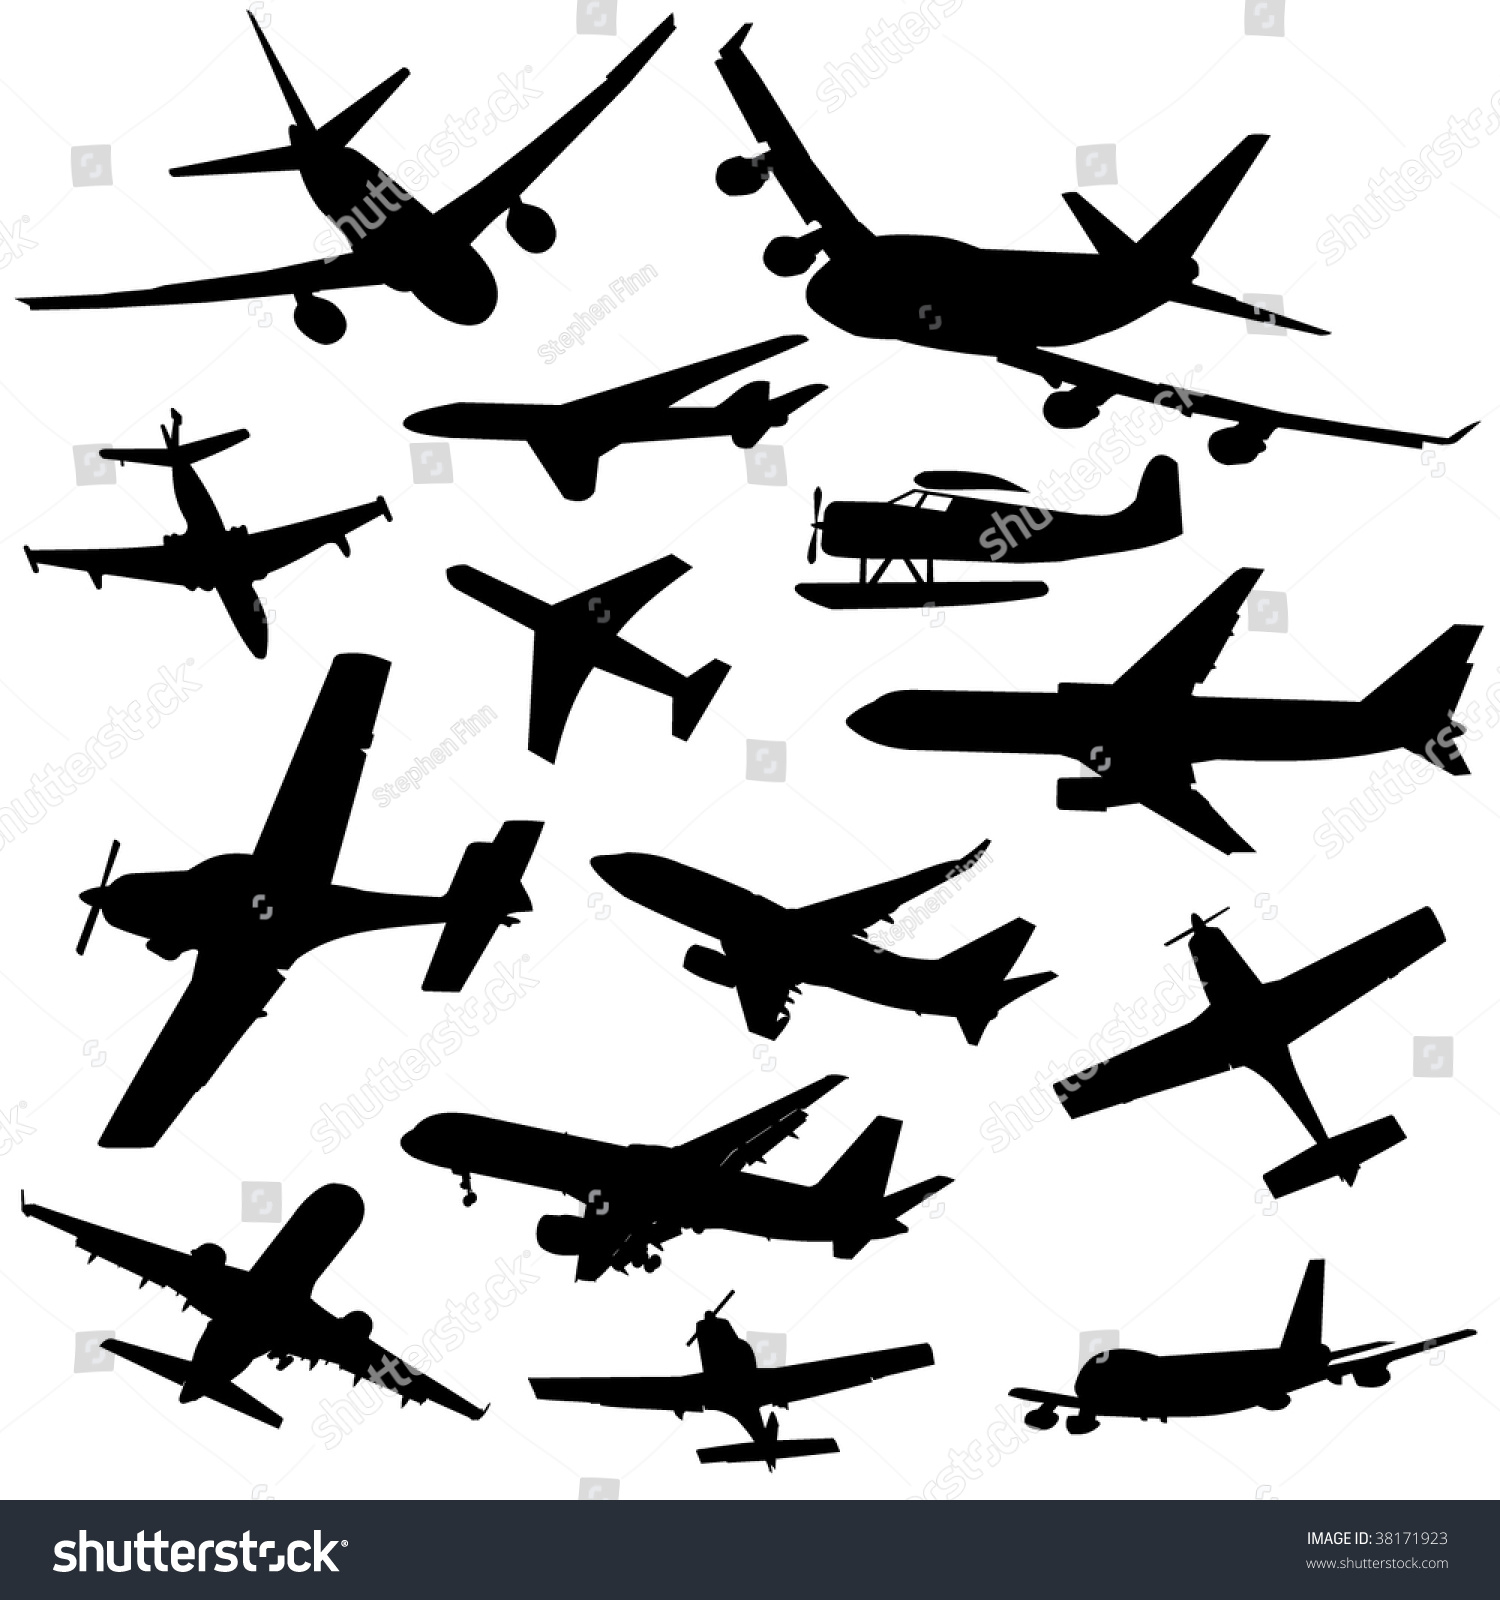 SVG of assorted plane silhouettes arriving and departing illustration svg